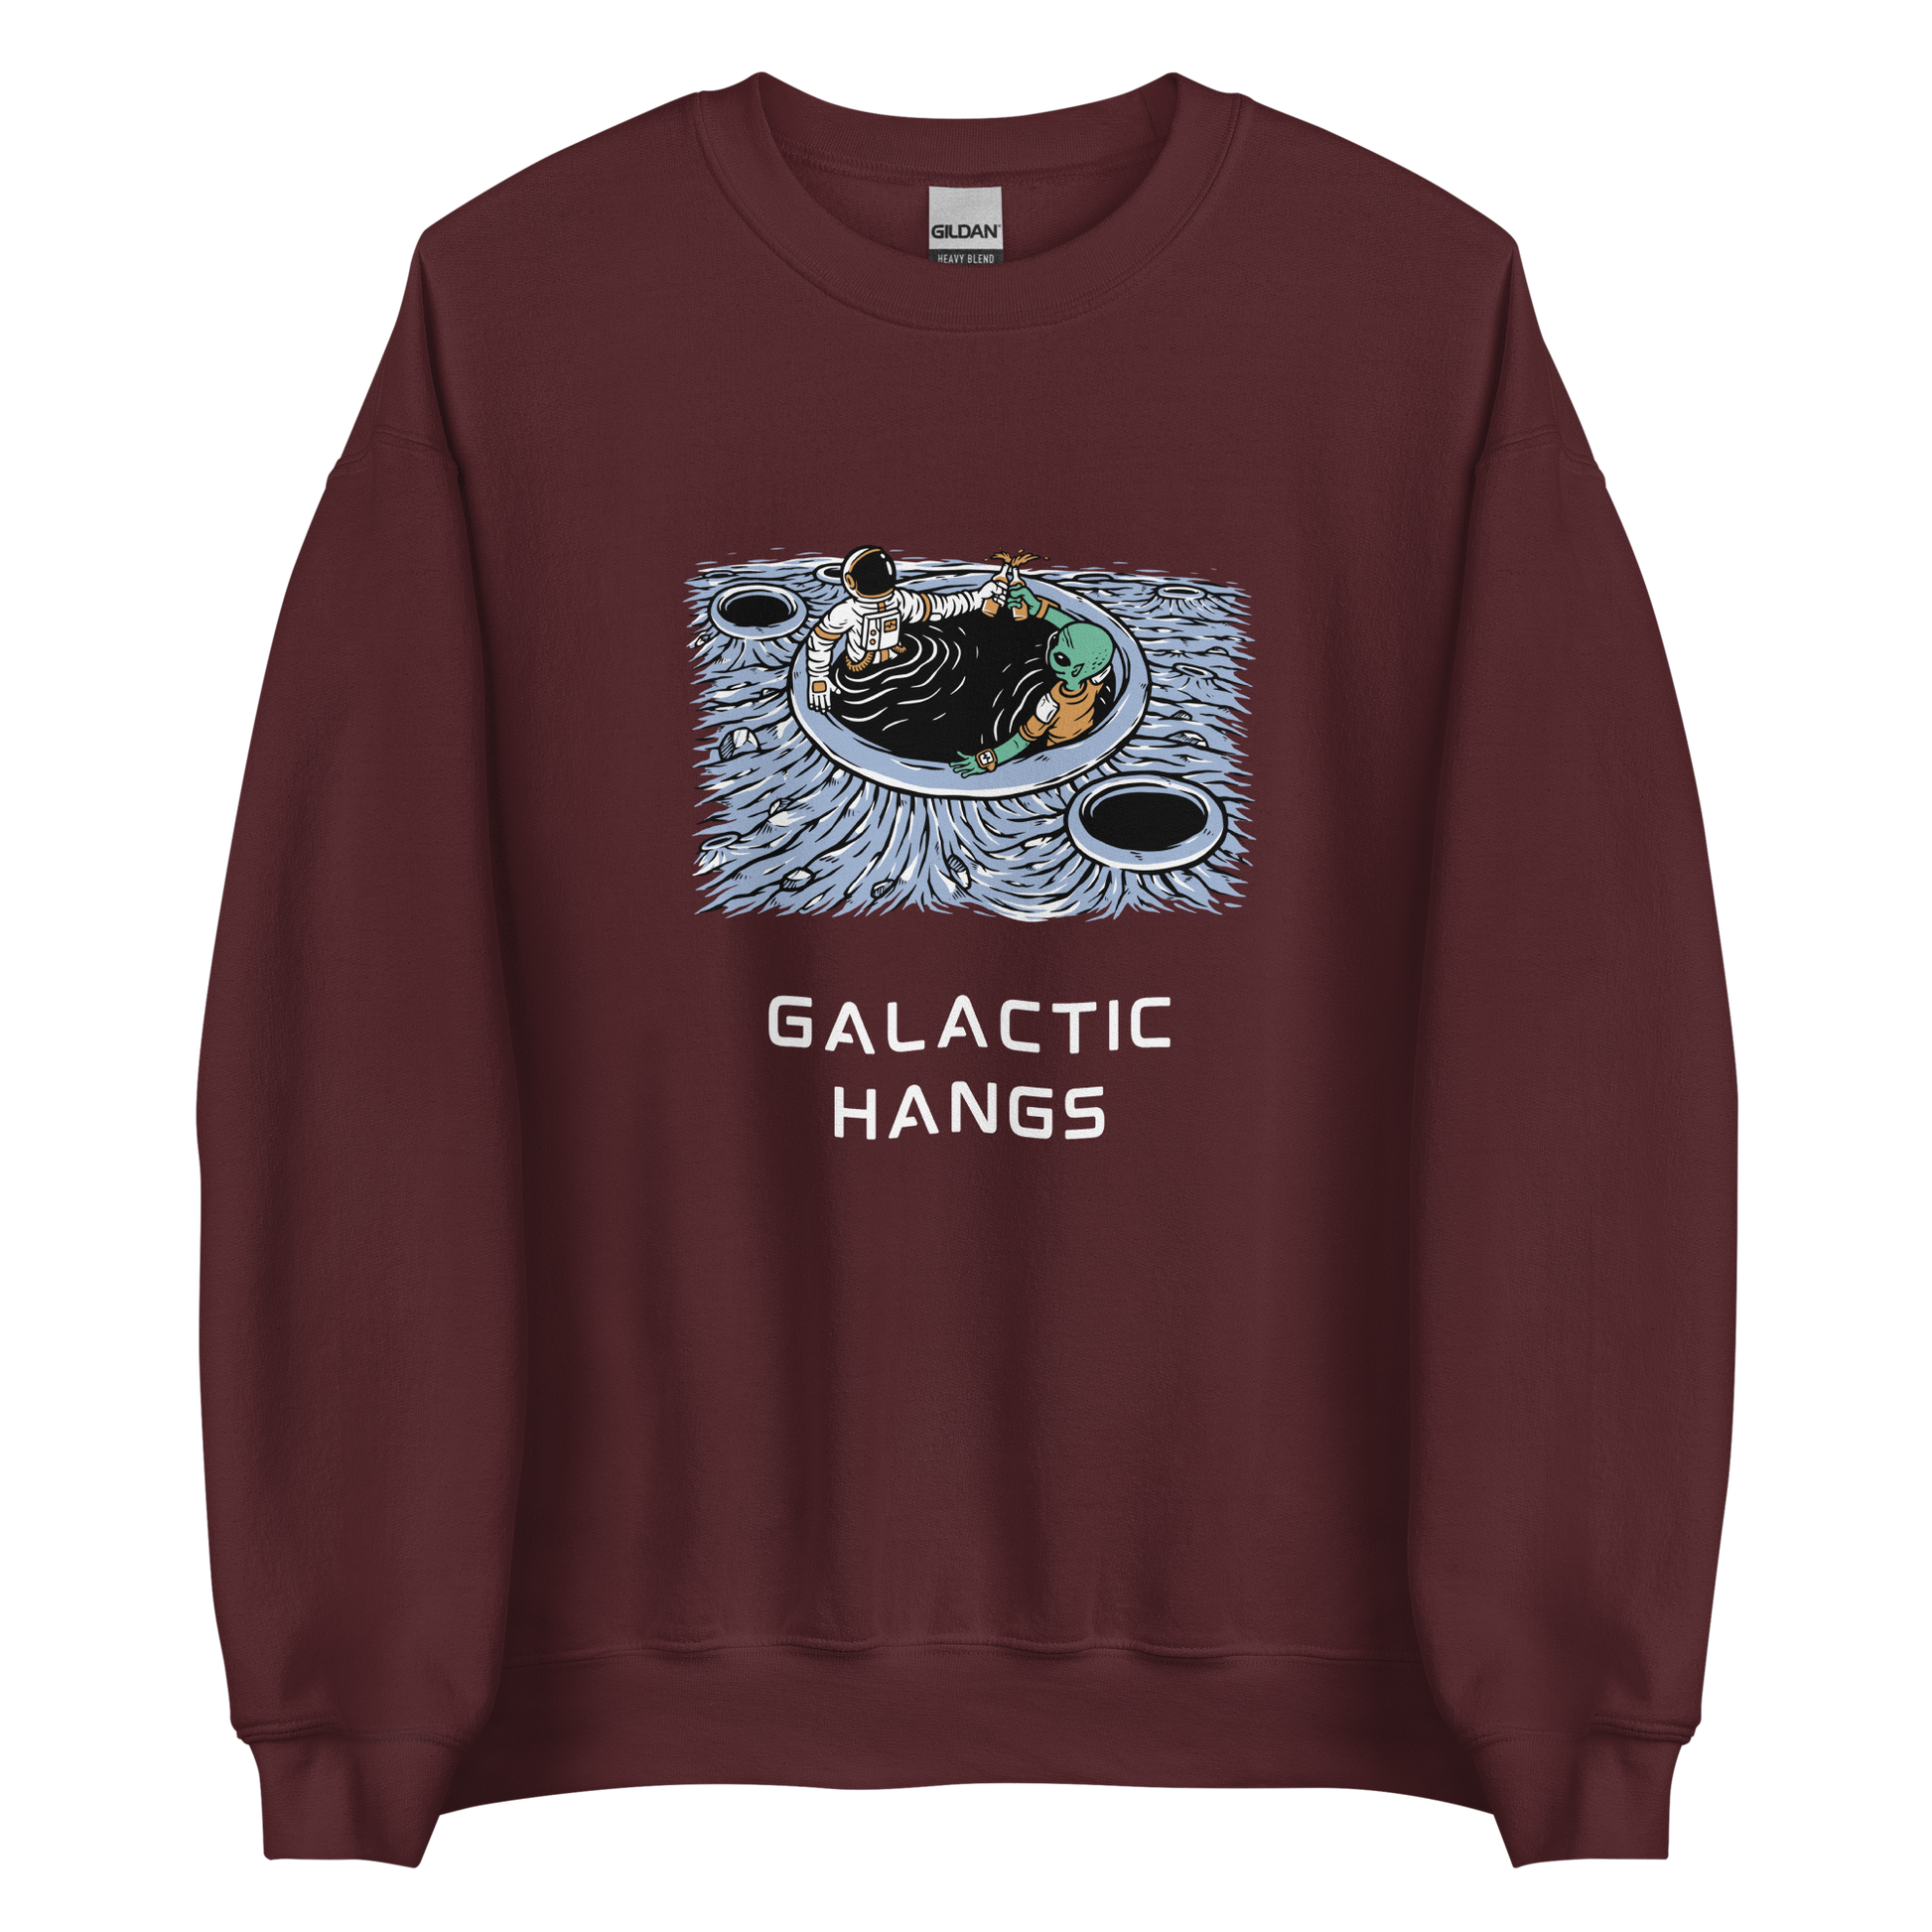 Maroon Galactic Hangs Sweatshirt featuring an out-of-this-world graphic of an Astronaut and Alien Chilling Together - Funny Graphic Space Sweatshirts - Boozy Fox